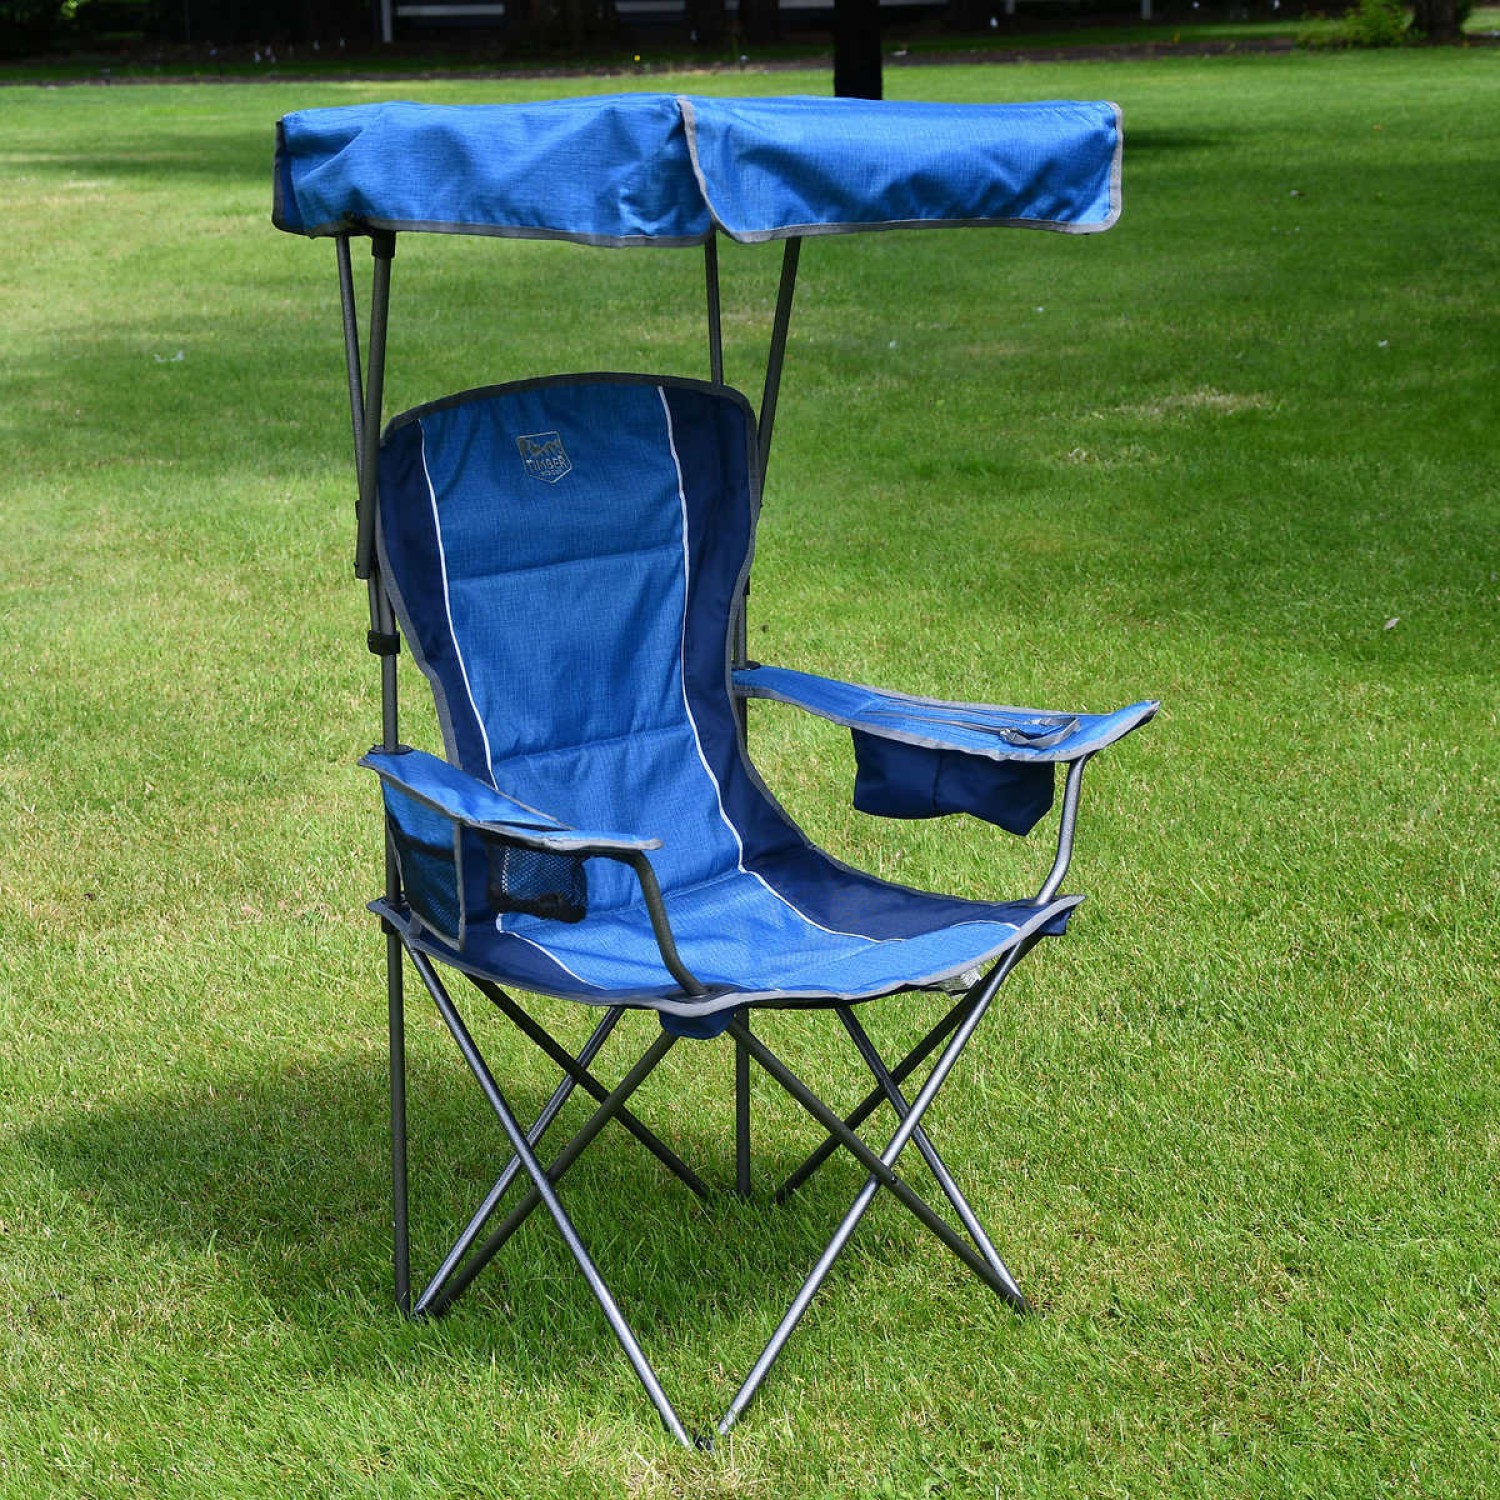 Timber Ridge Canopy Chair 2pack 228848471 1500x1500 